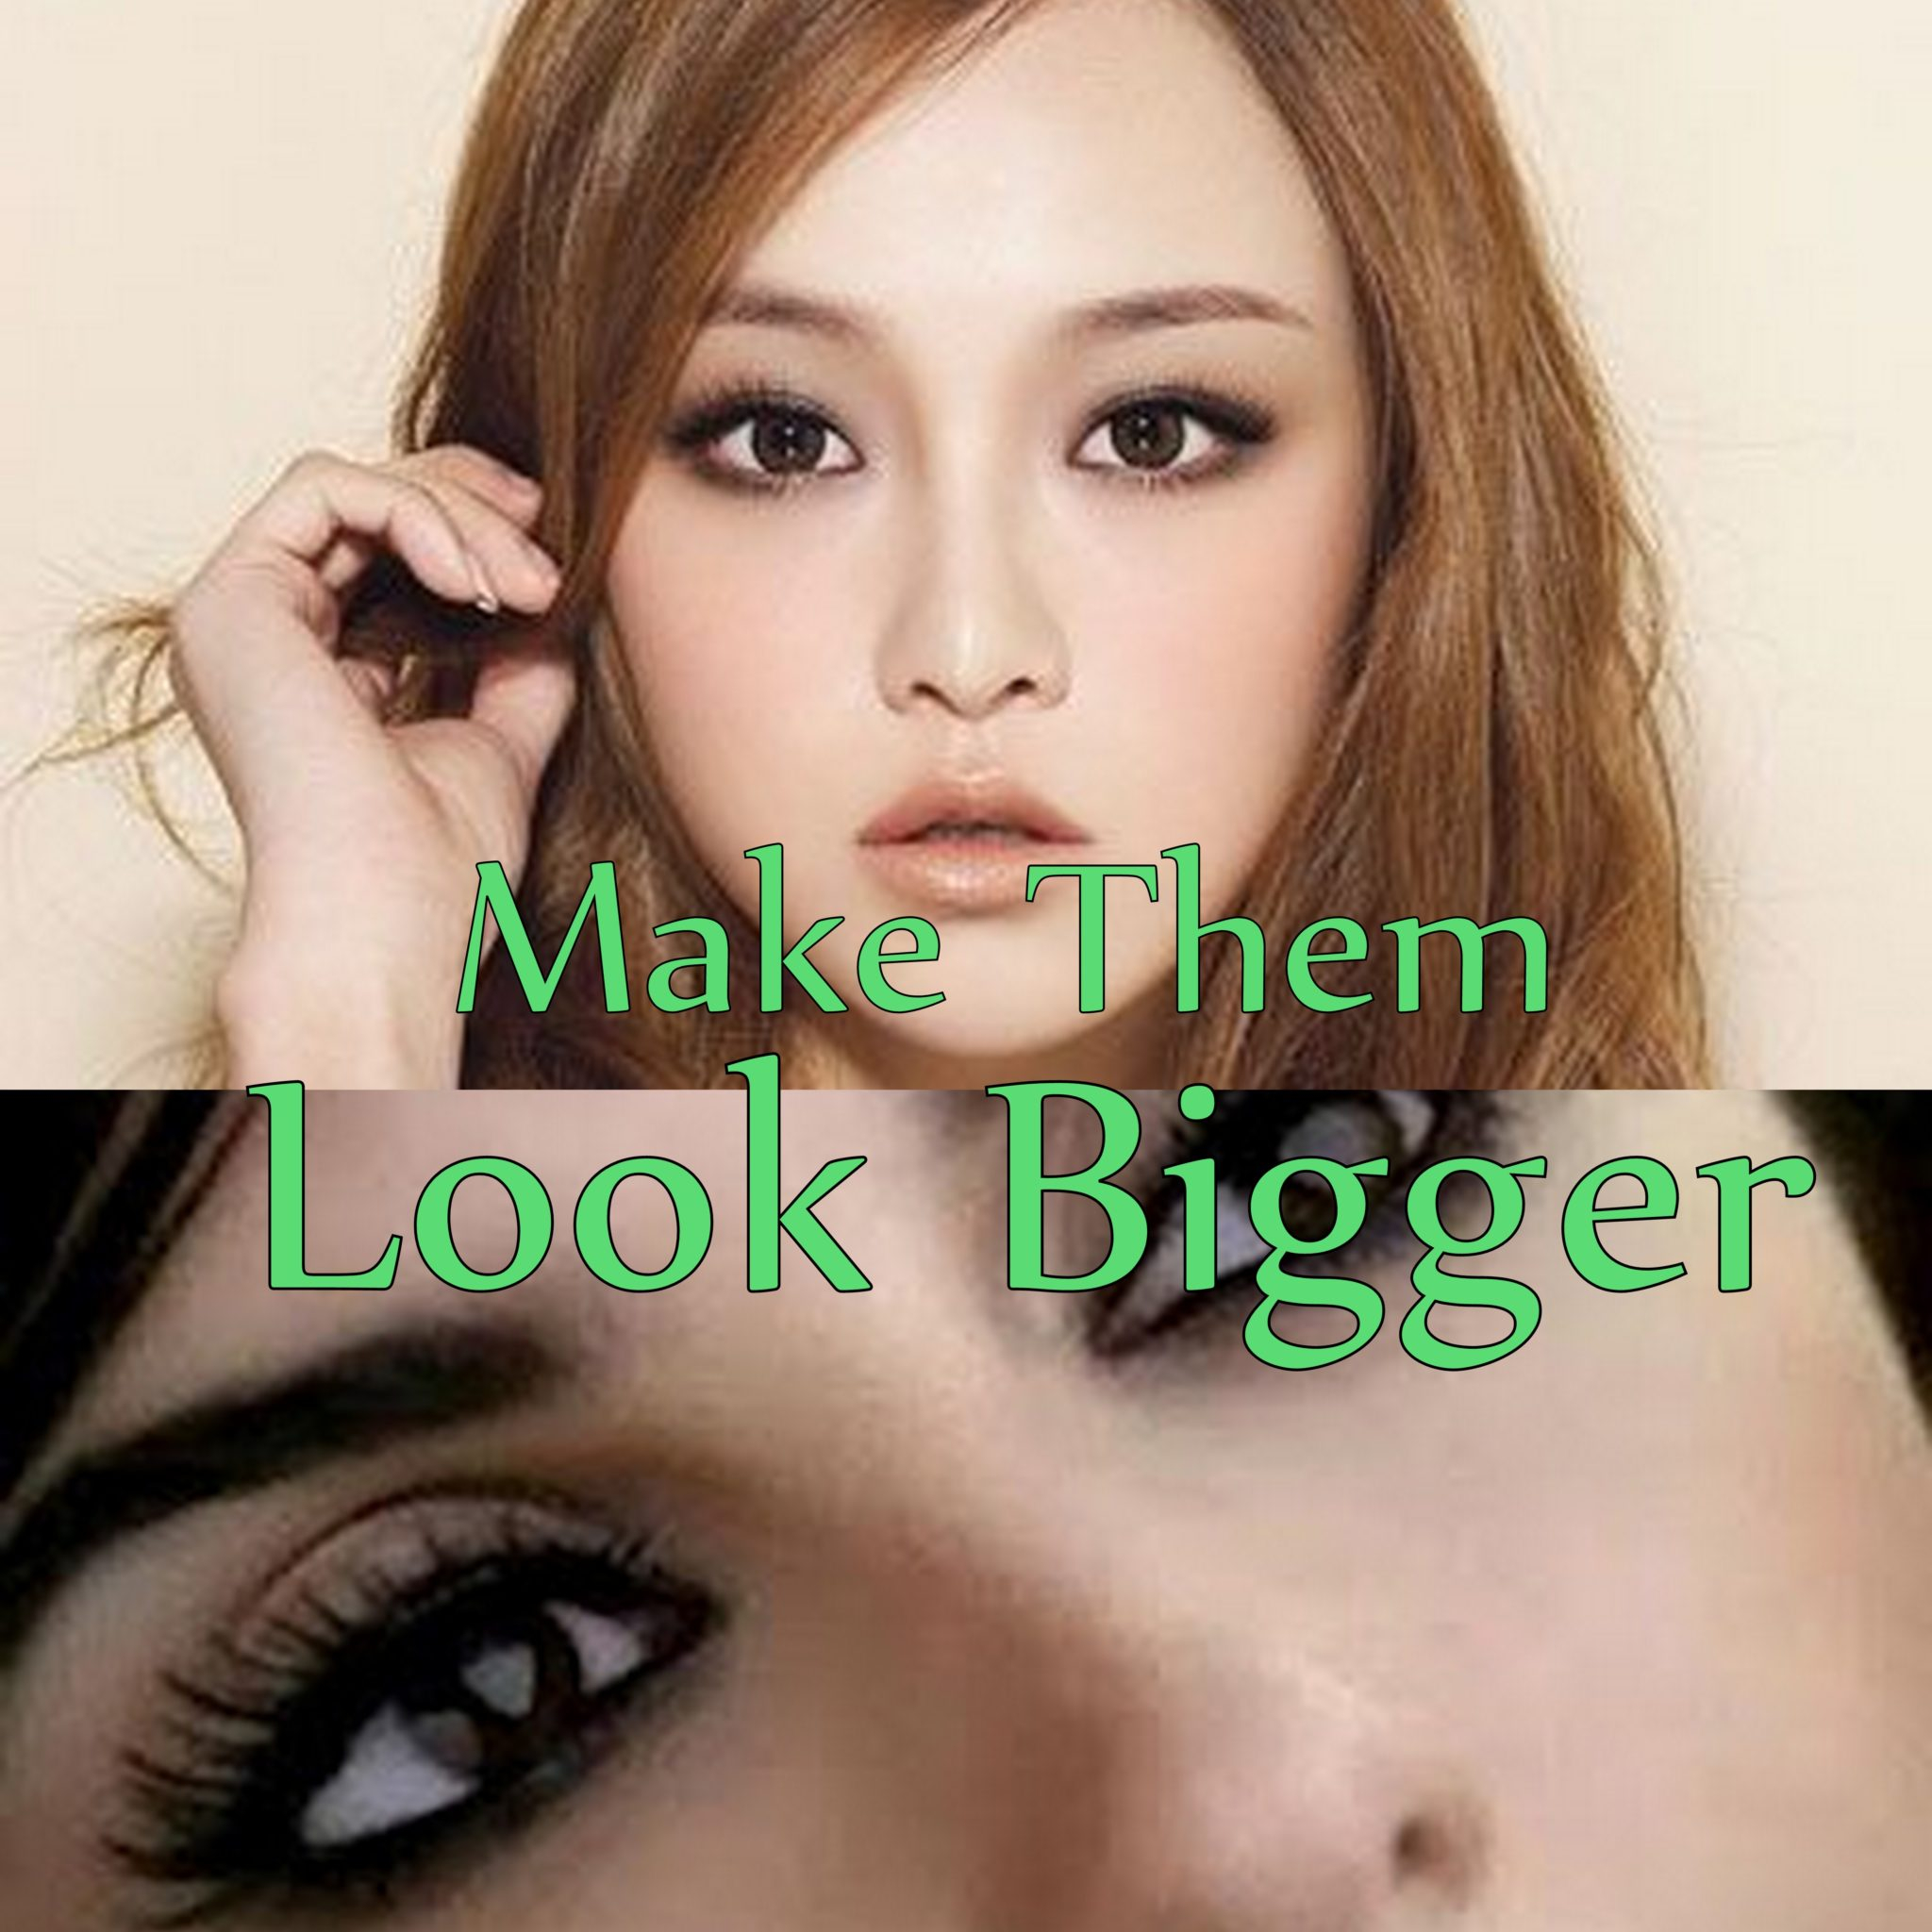 Makeup For Small Eyes Eye Makeup For Small Eyes Make Them Look Bigger